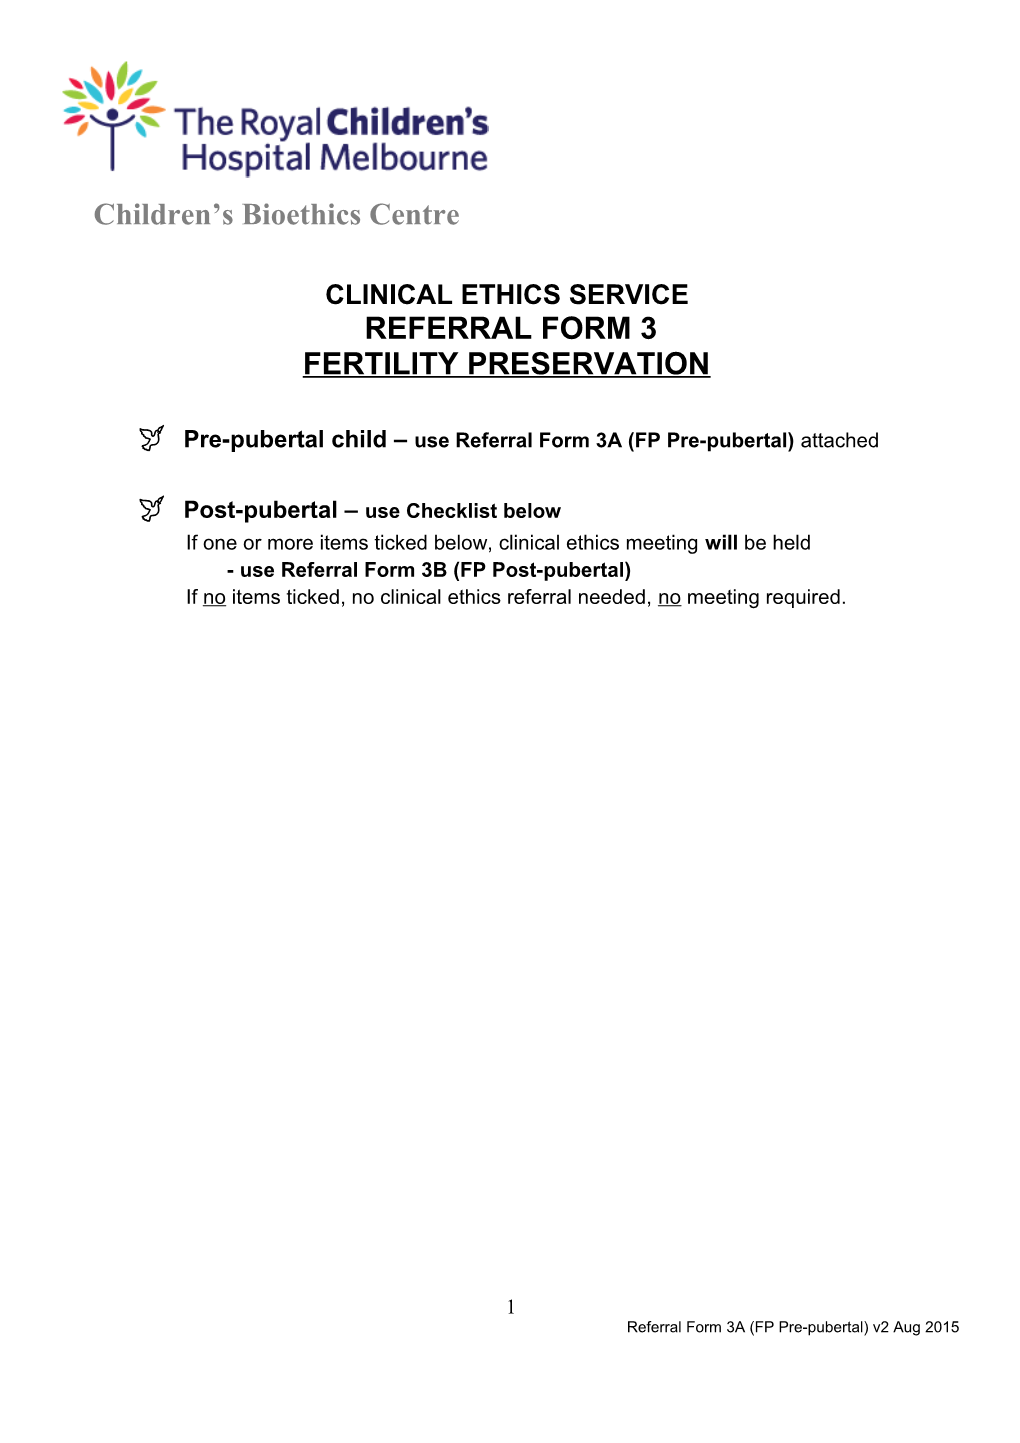 Clinical Ethics Service